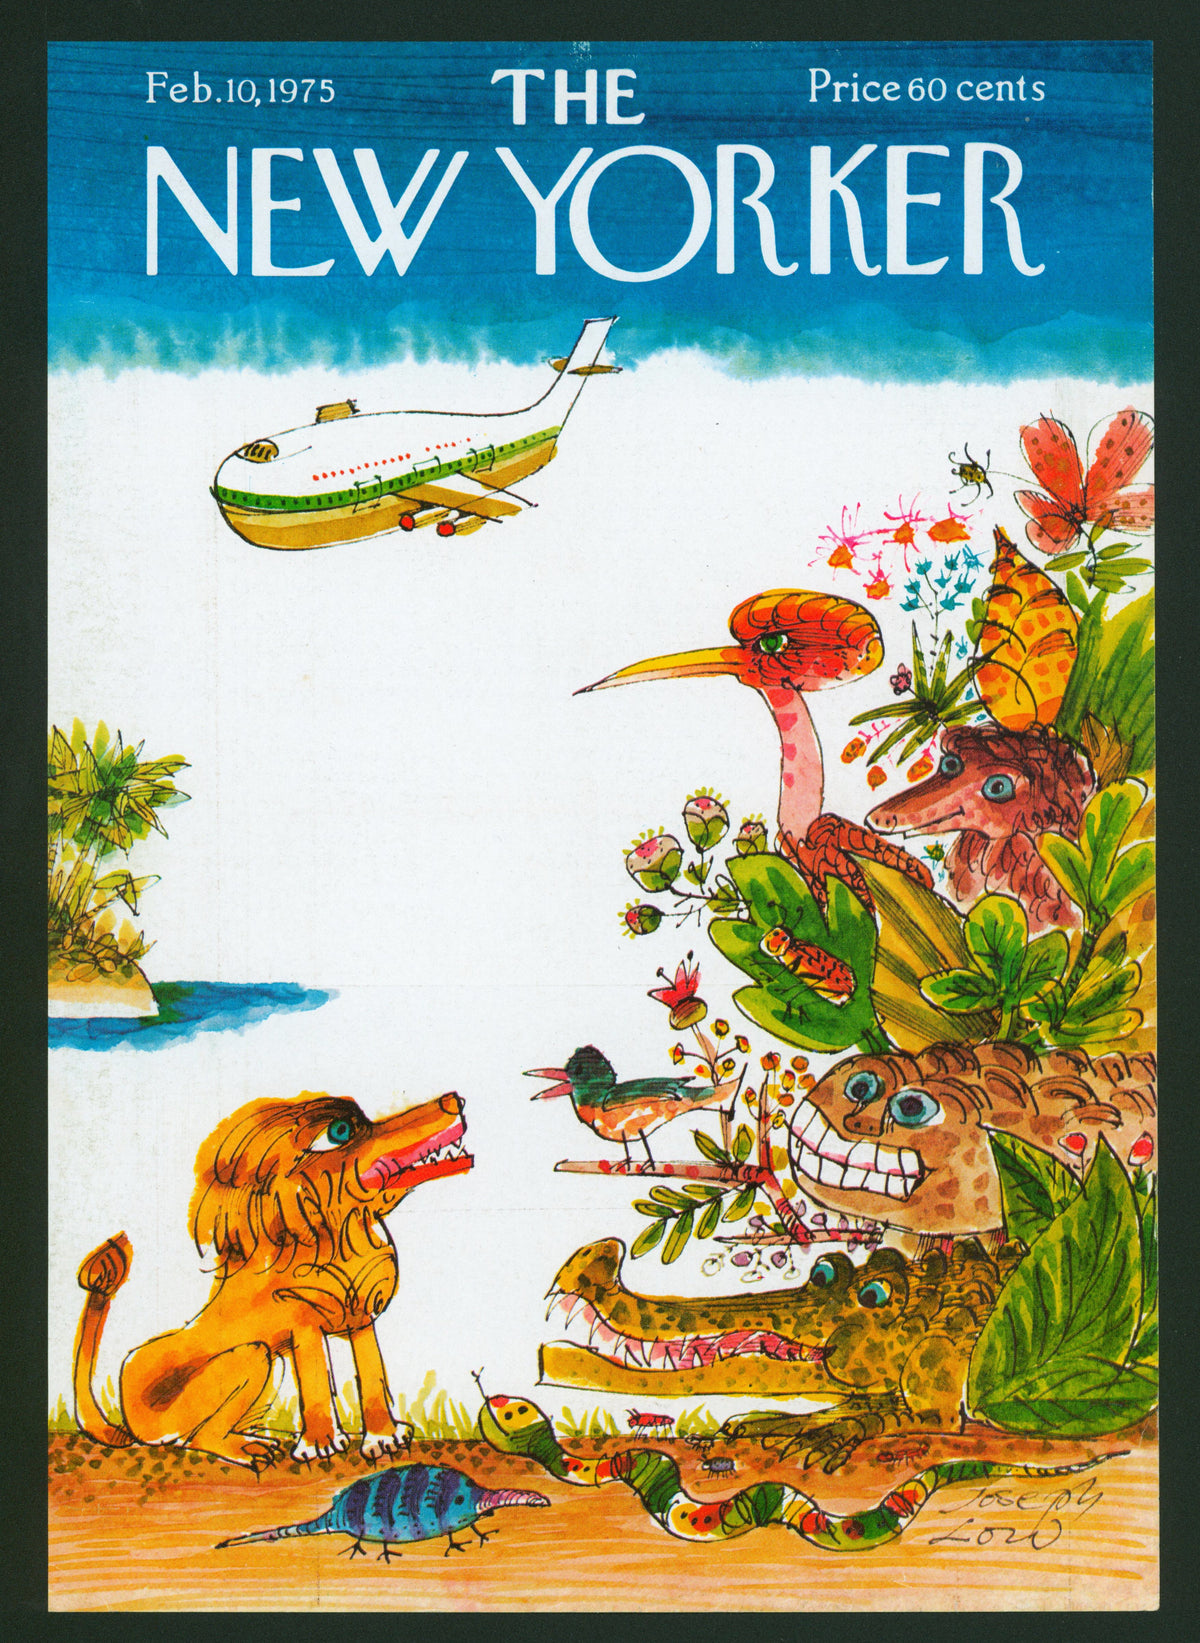 Island Animals- The New Yorker - Authentic Vintage Antique Print